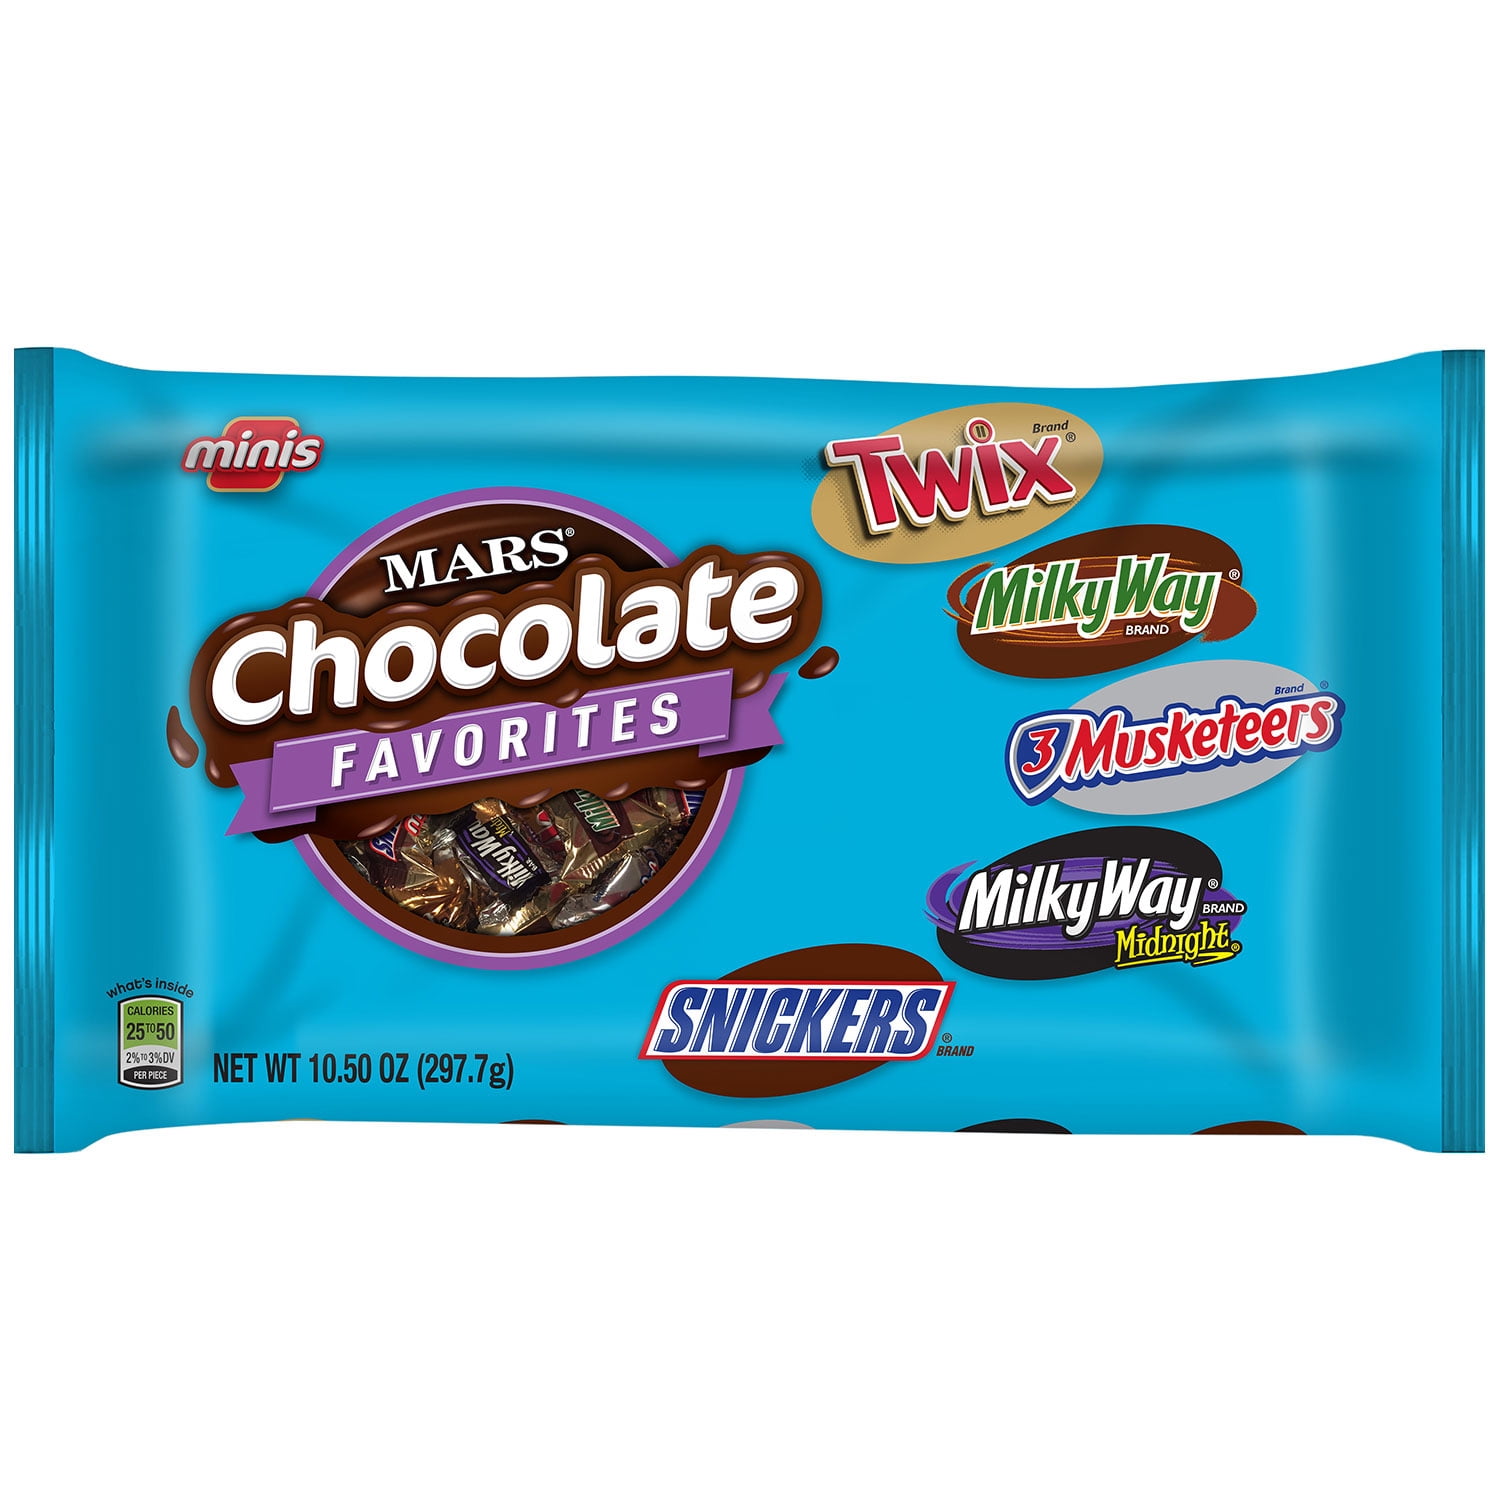 M&m Mars Milky Way Midnight Dark Candy Bars, 24 Ct., Candy & Chocolate, Food & Gifts